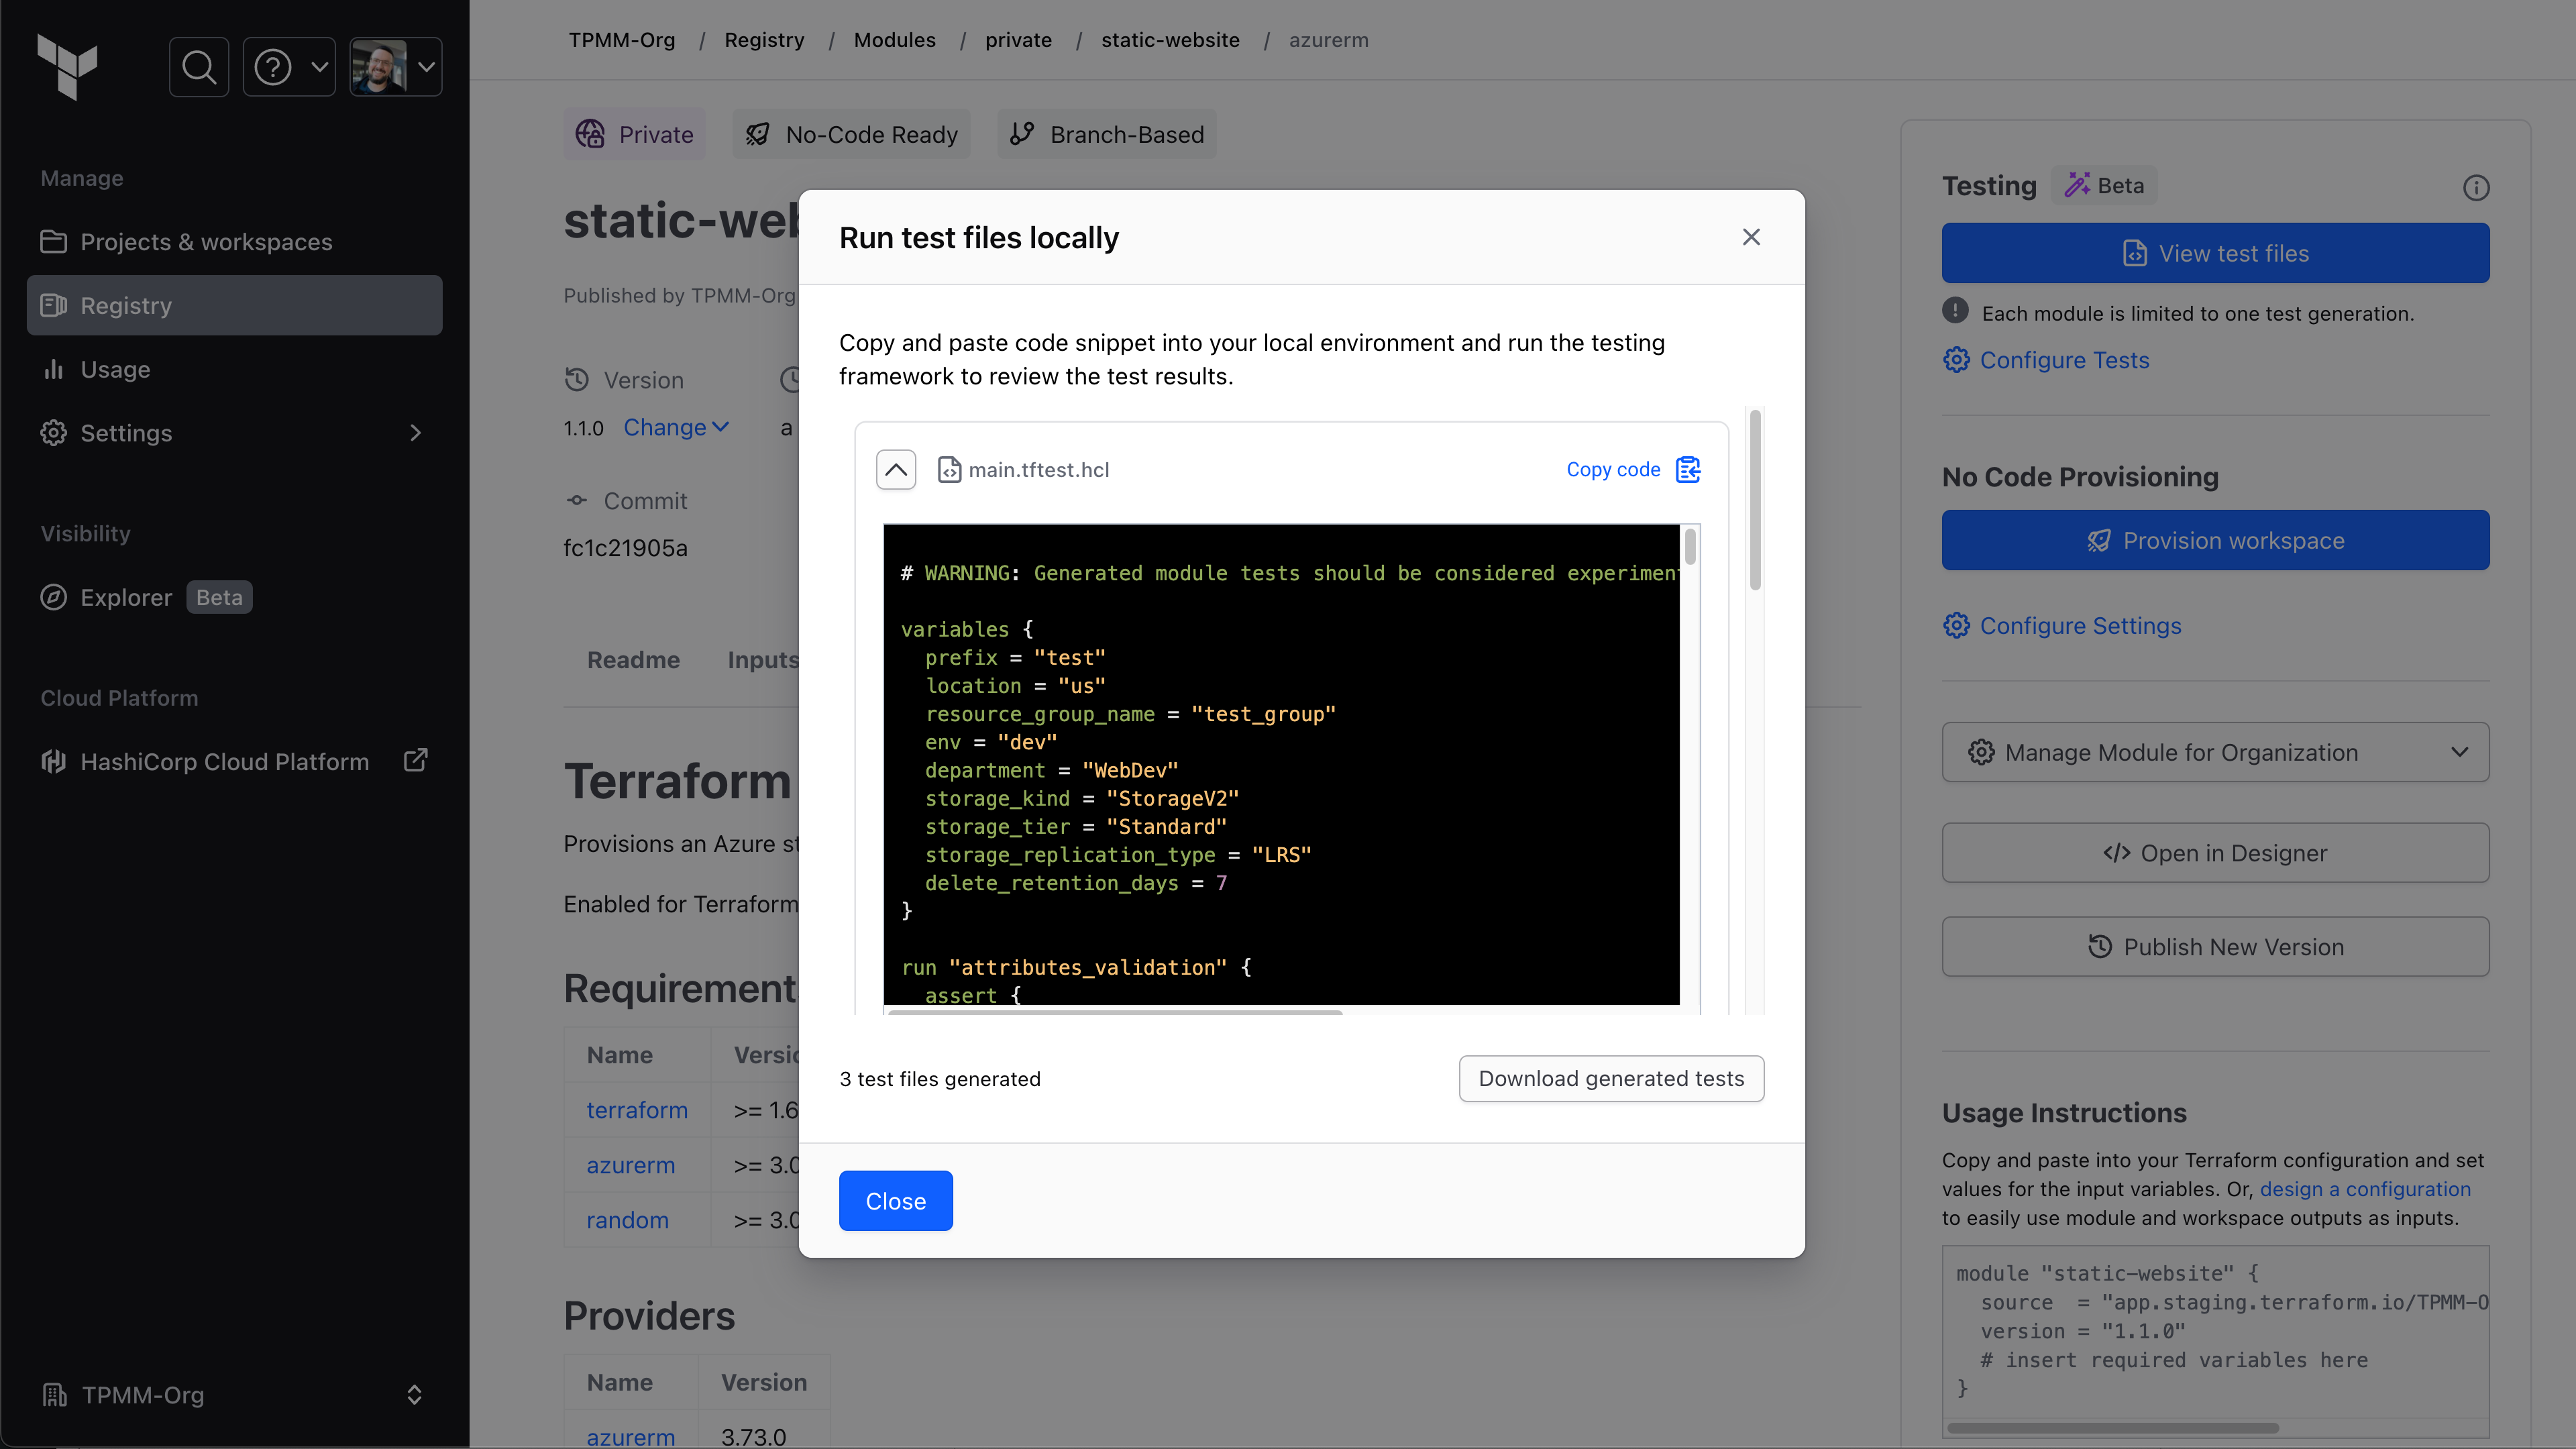 Users can copy and paste the AI-generated test code to run the Terraform testing framework.